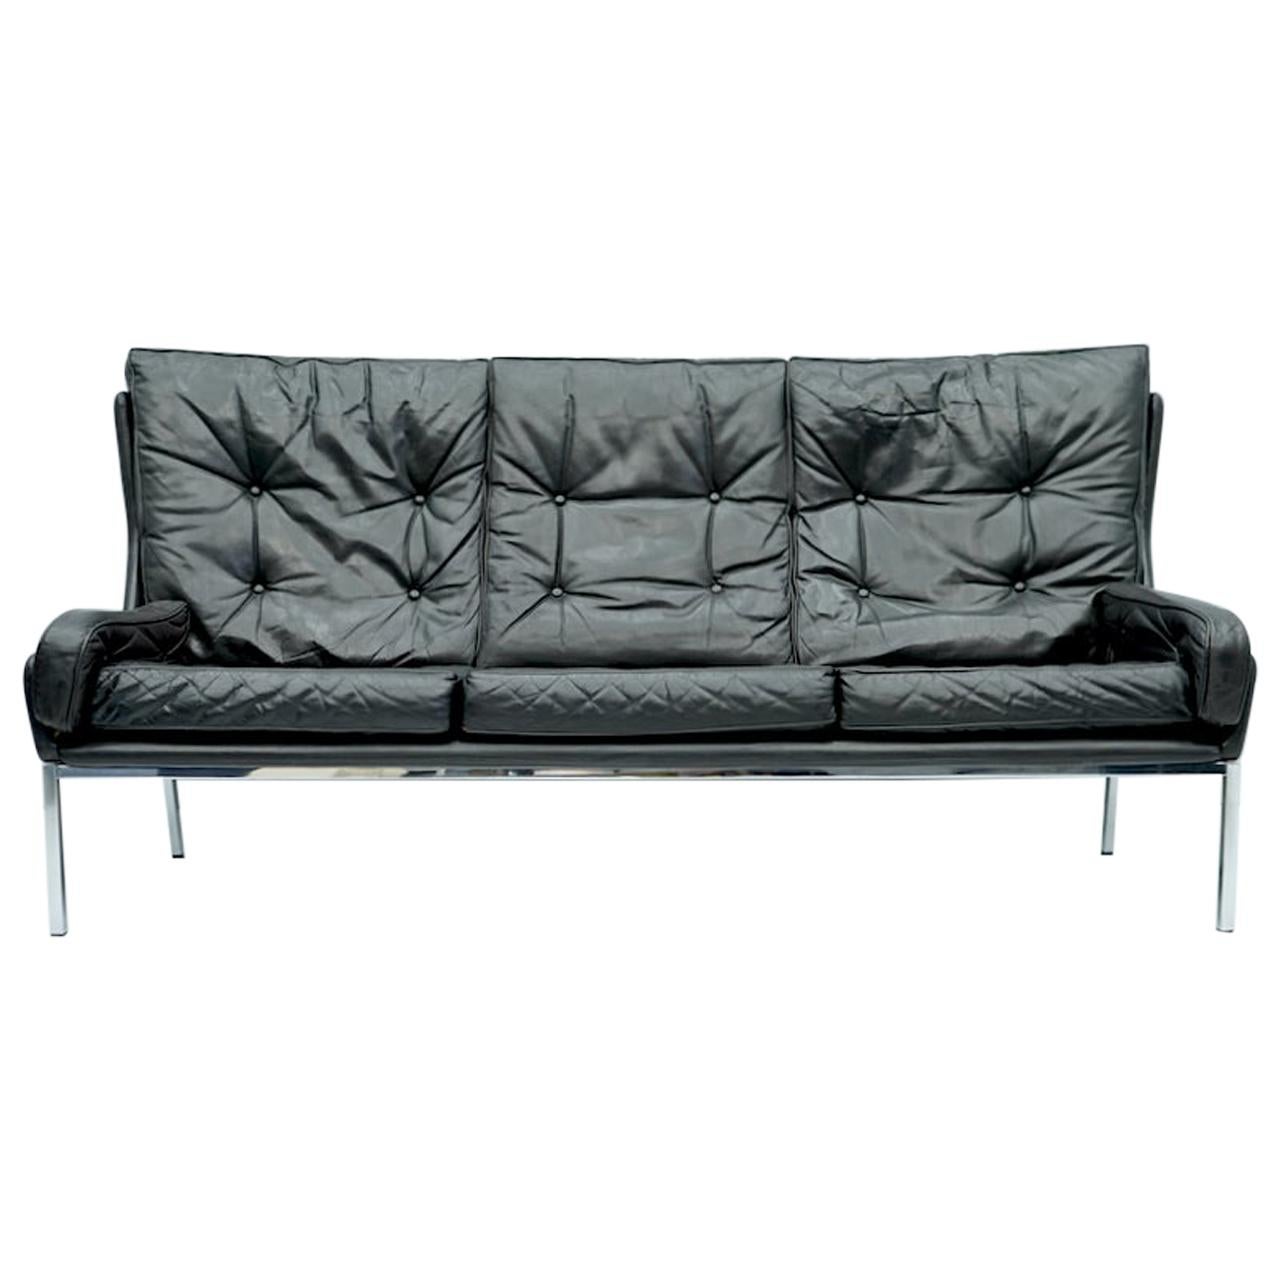 Rare Three-Seat Sofa by Roland Rainer in Black Leather, 1960s For Sale